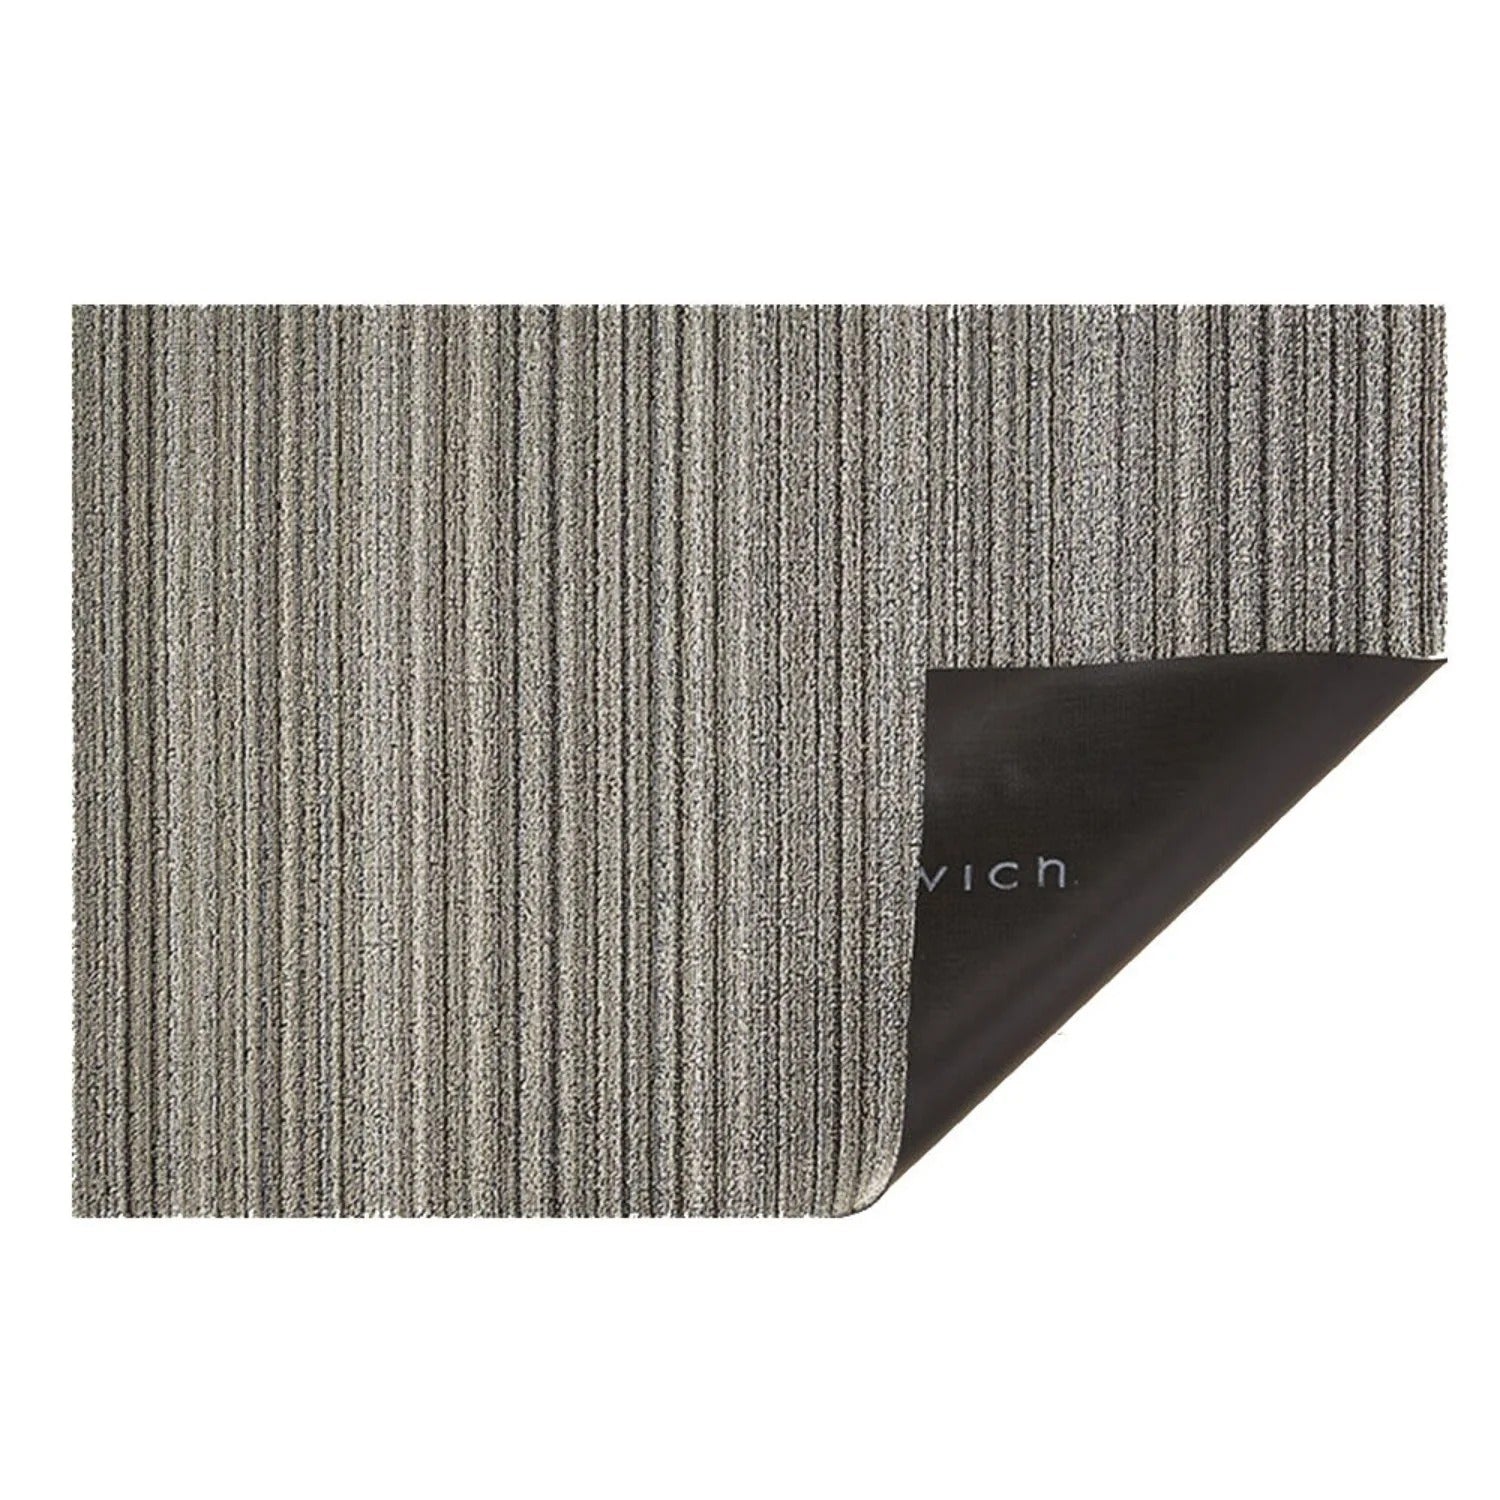 https://top3.com.au/collections/brand-chilewich/products/chilewich-large-doormat-61-x-91cm-fade-stone